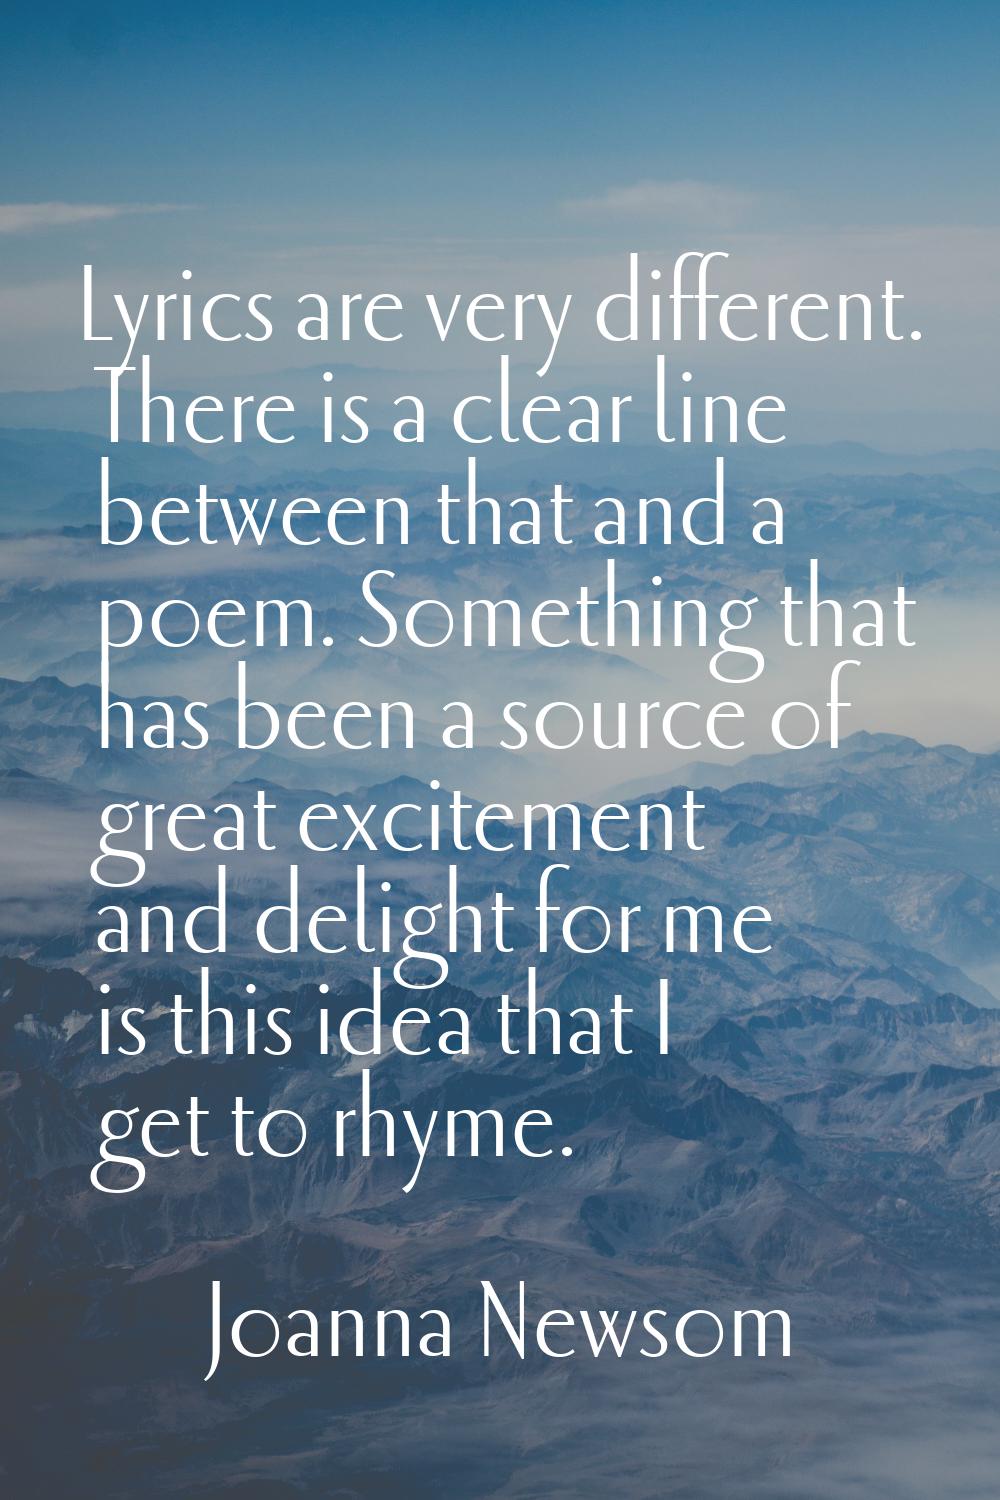 Lyrics are very different. There is a clear line between that and a poem. Something that has been a